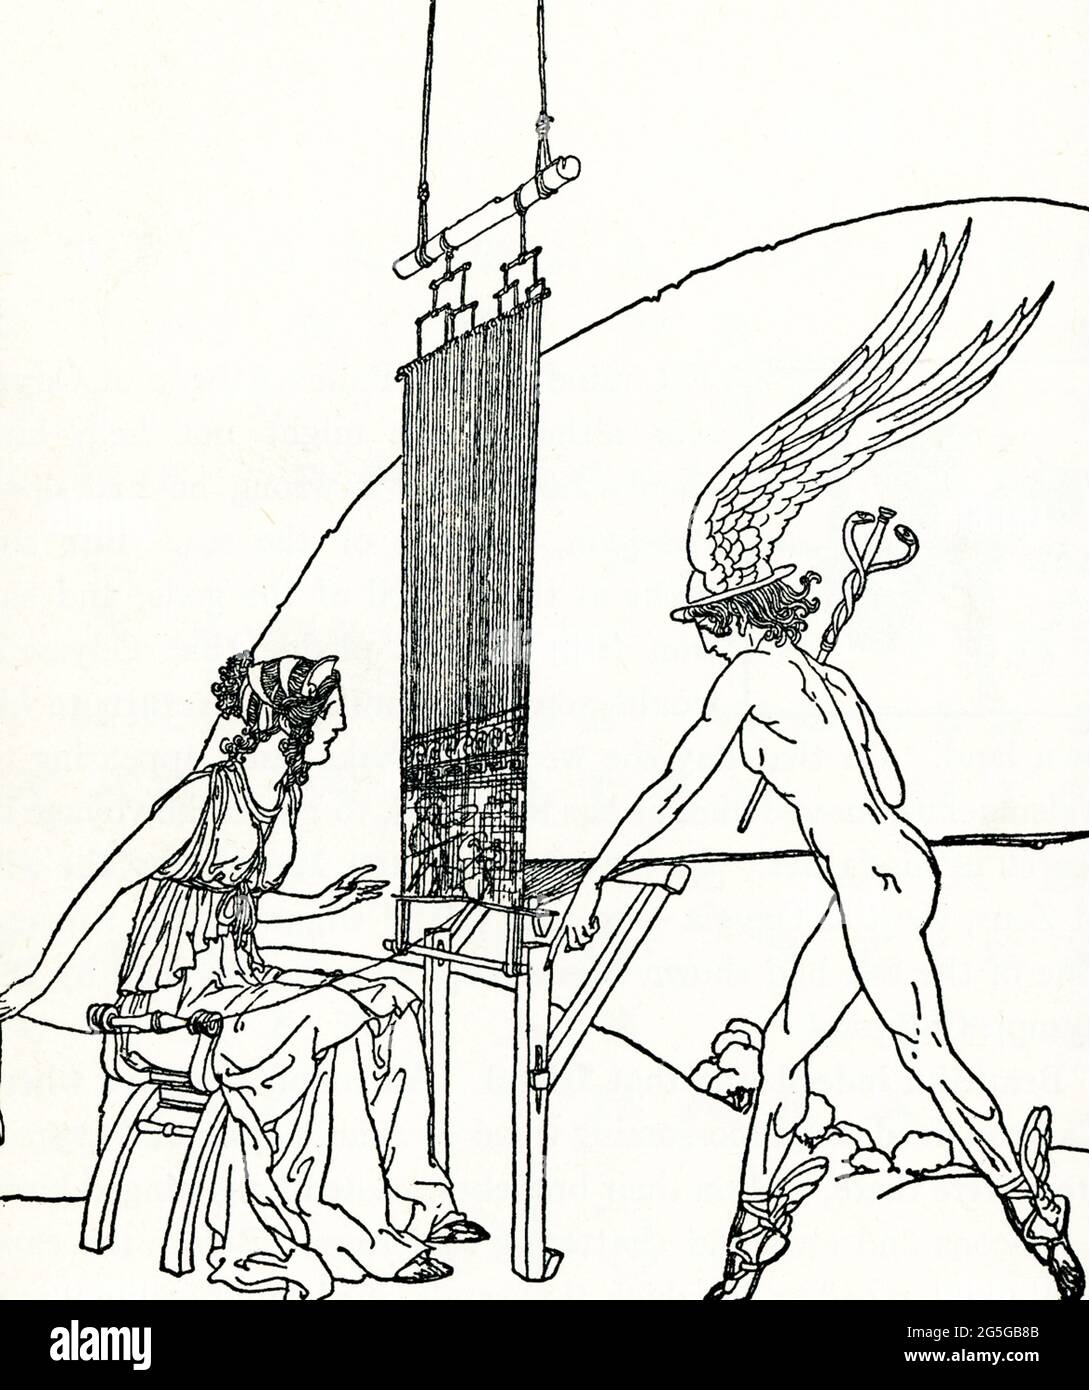 The 1918 caption reads: “Hermes visits Calypso in her cave and says that  Zeus wants her to let Odysseus go.” In Greek mythology, Calypso is the  daughter of the Titan Atlas (also